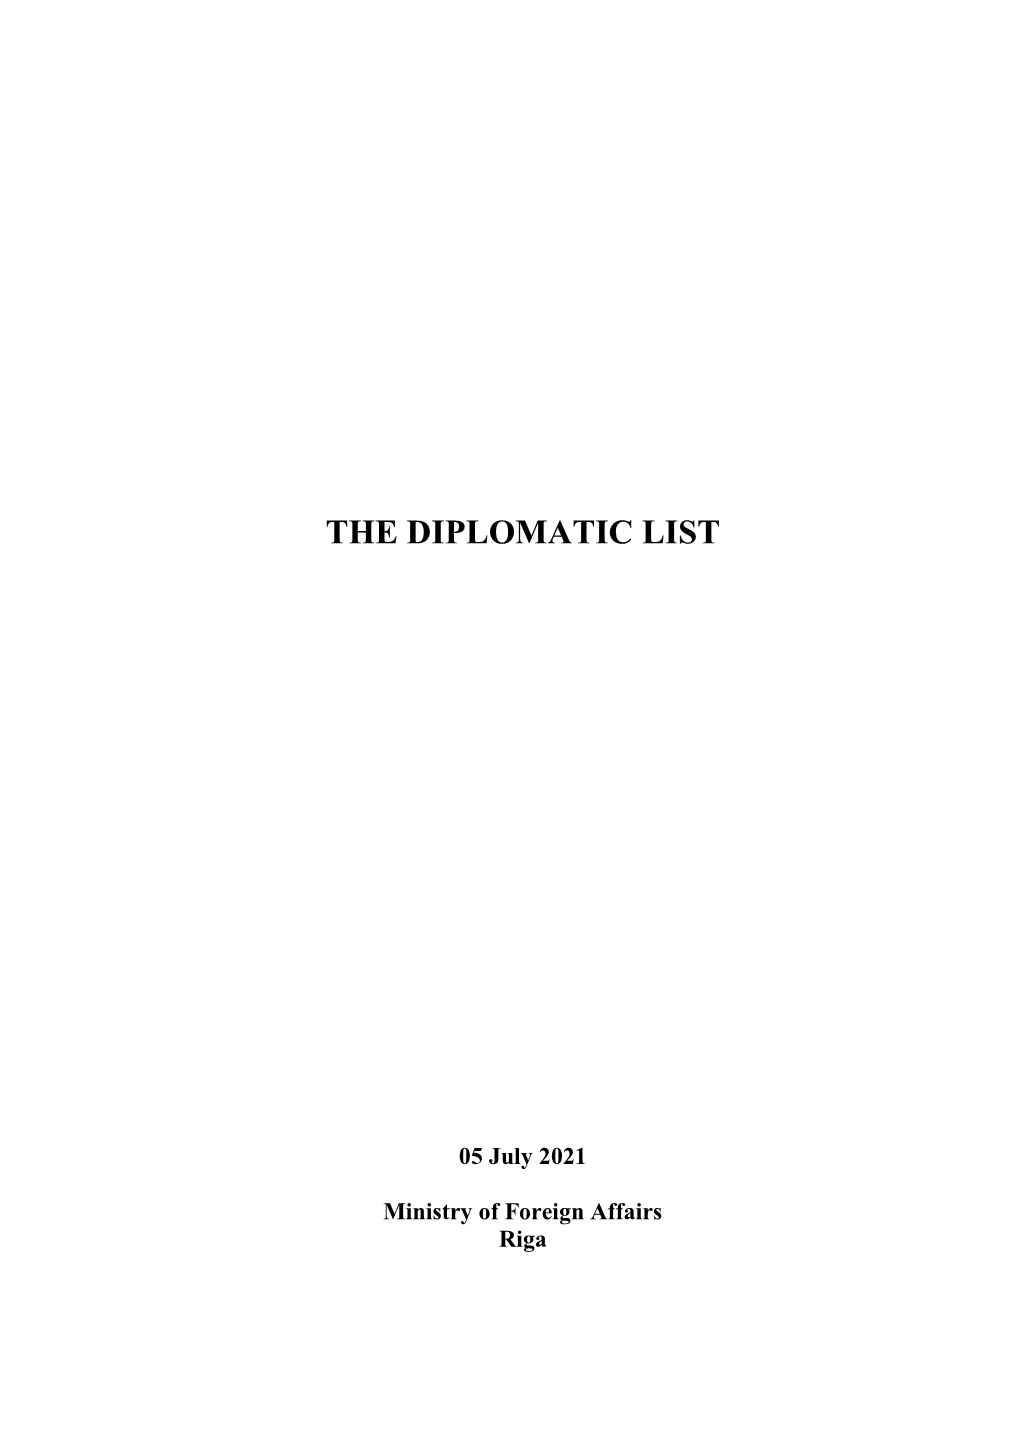 The Diplomatic List (30 August, 2021)